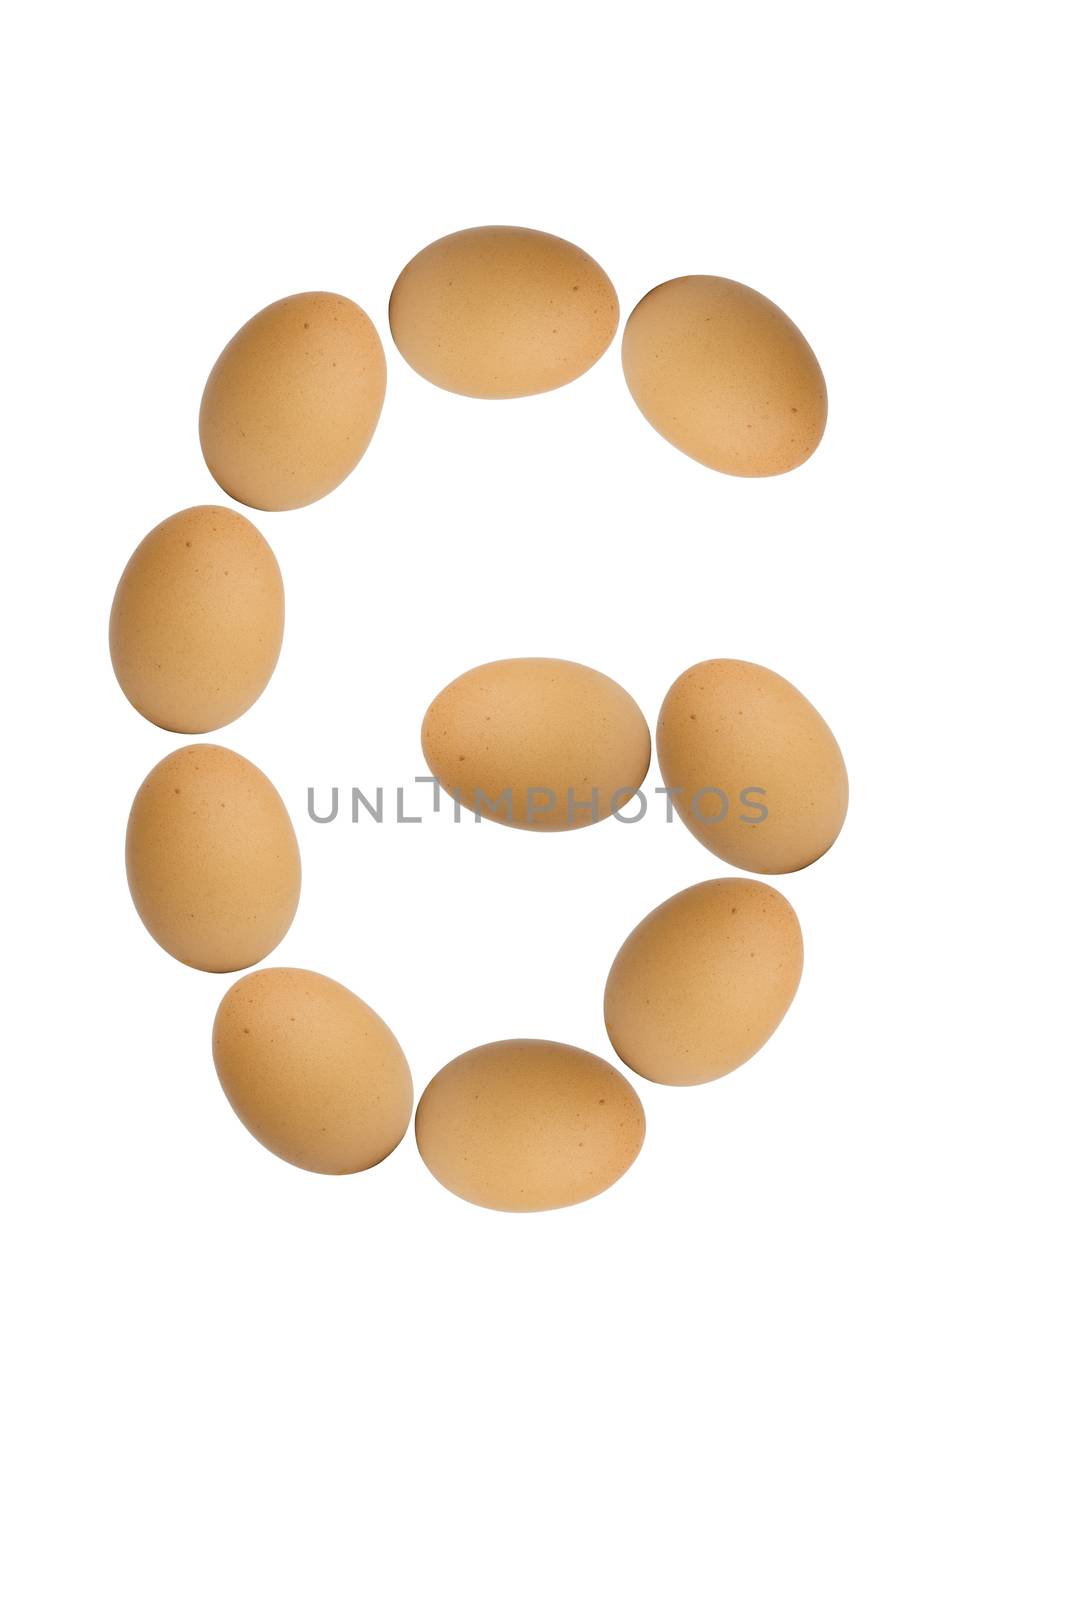 Alphabets  A to Z from brown eggs alphabet isolated on white background, G